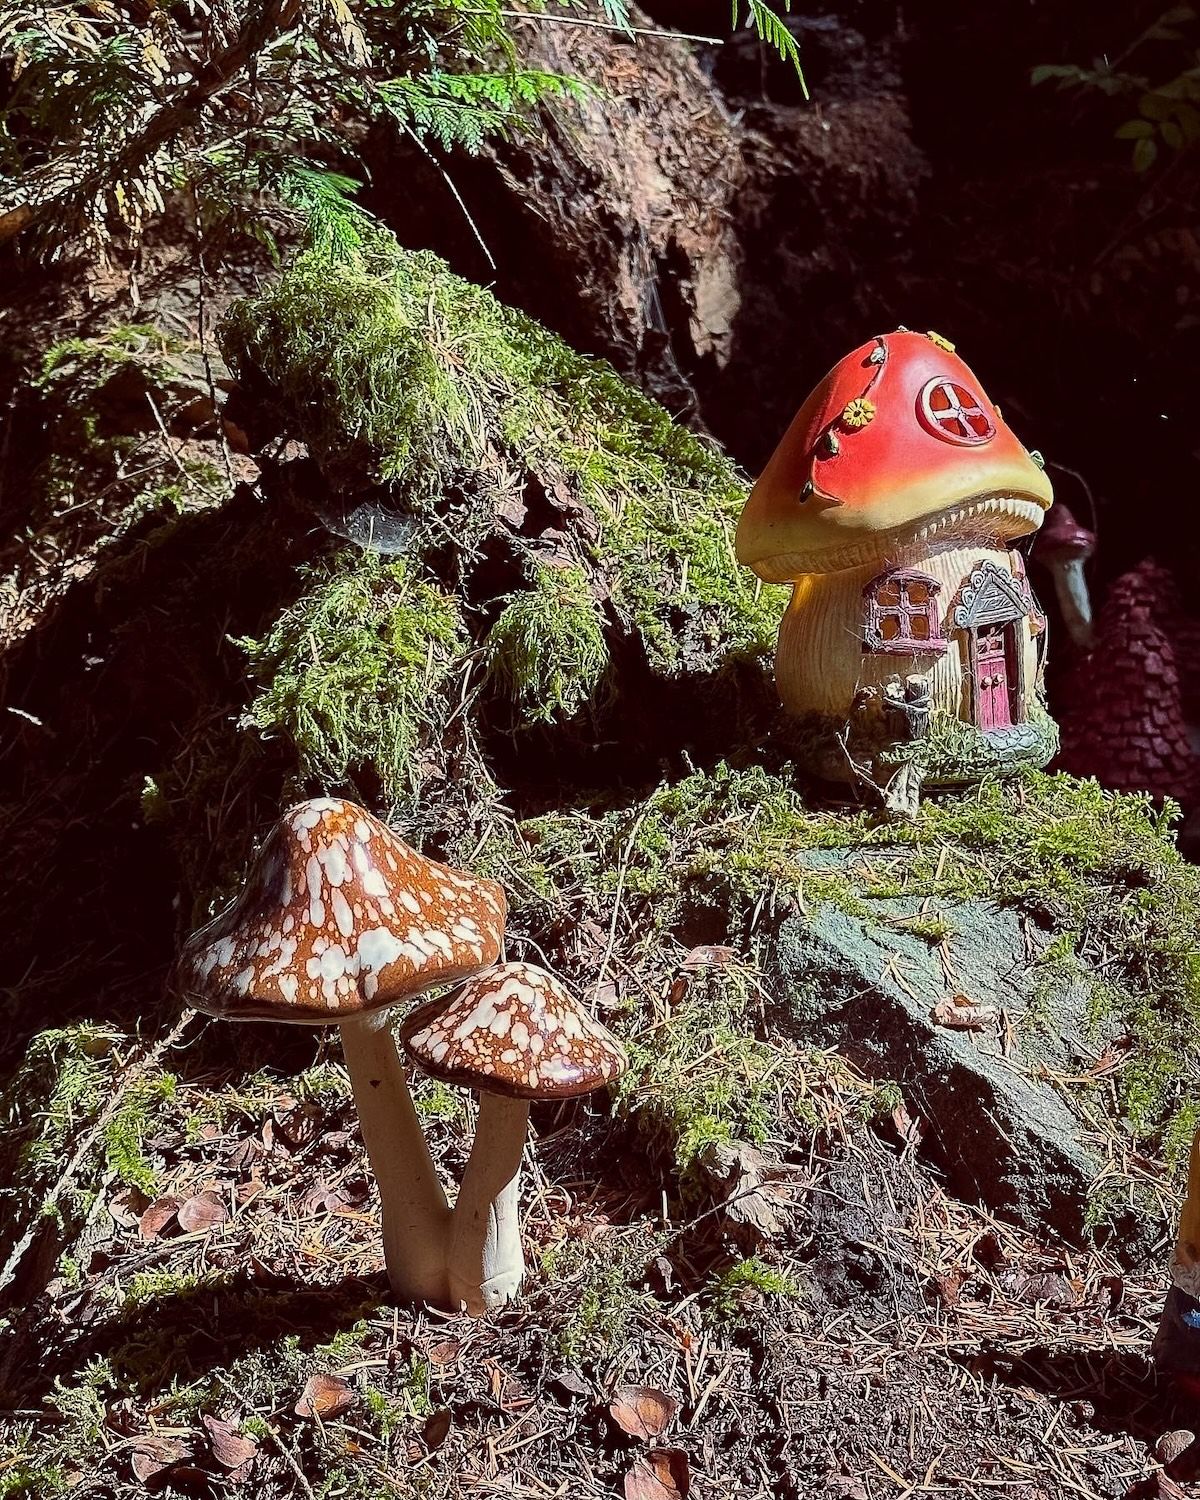 Toy mushrooms and mushroom house in moss outside